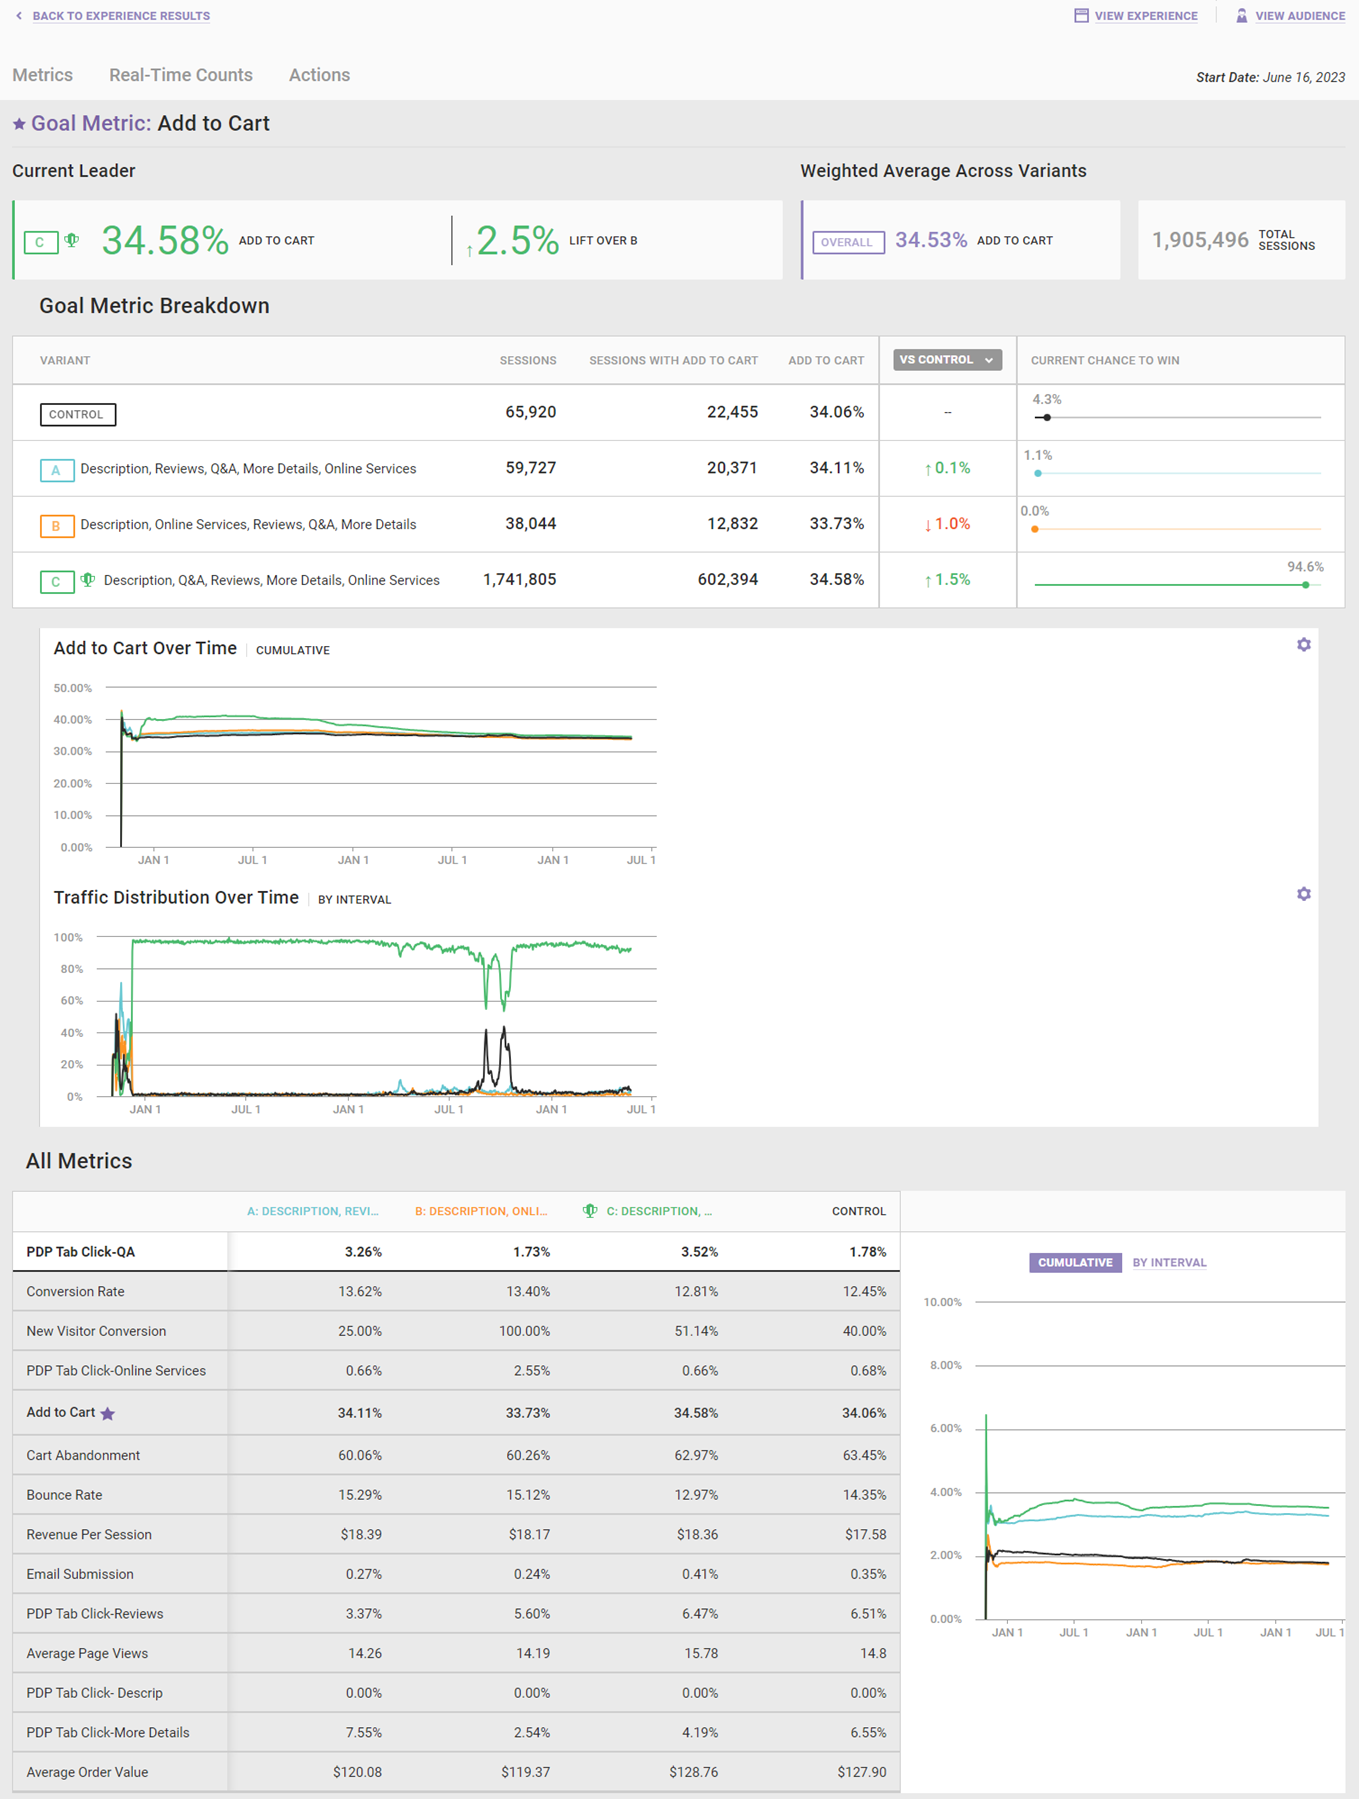 Example of the Metrics tab on the Experience Results page for a Dynamic Testing experience